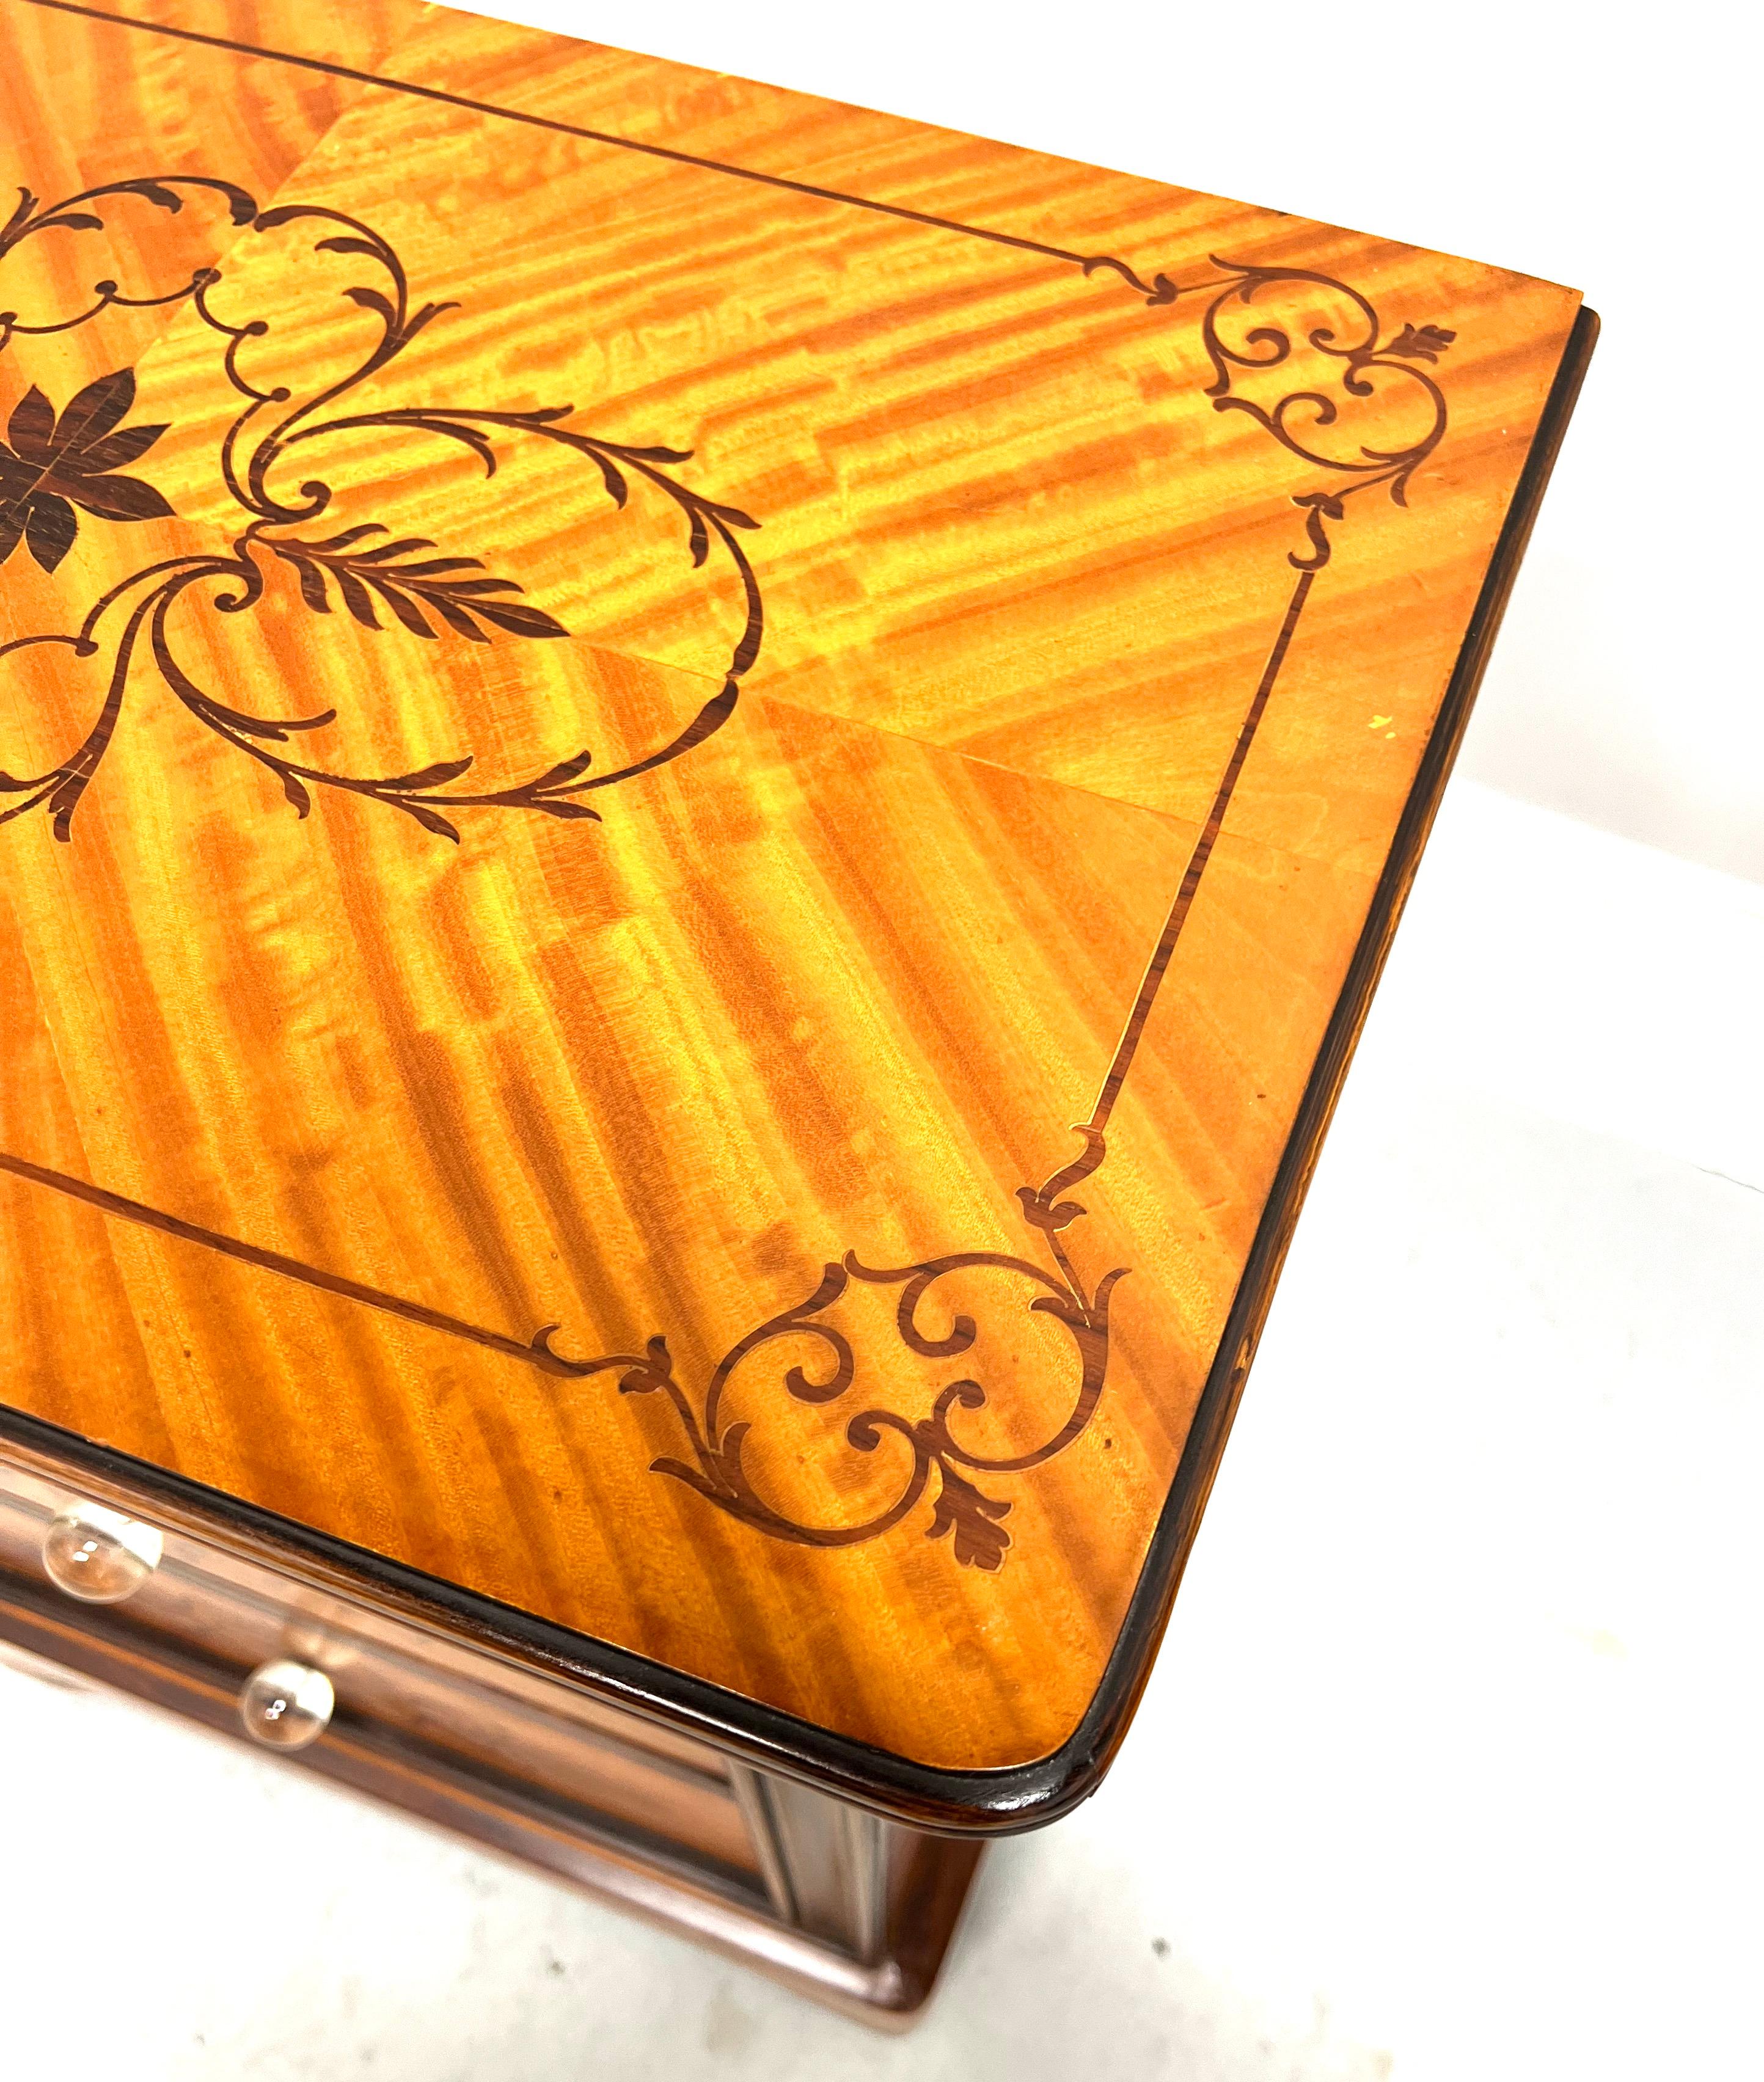 Early 20th Century Biedermeier Style Marquetry Nightstands Bedside Chests - Pair For Sale 4